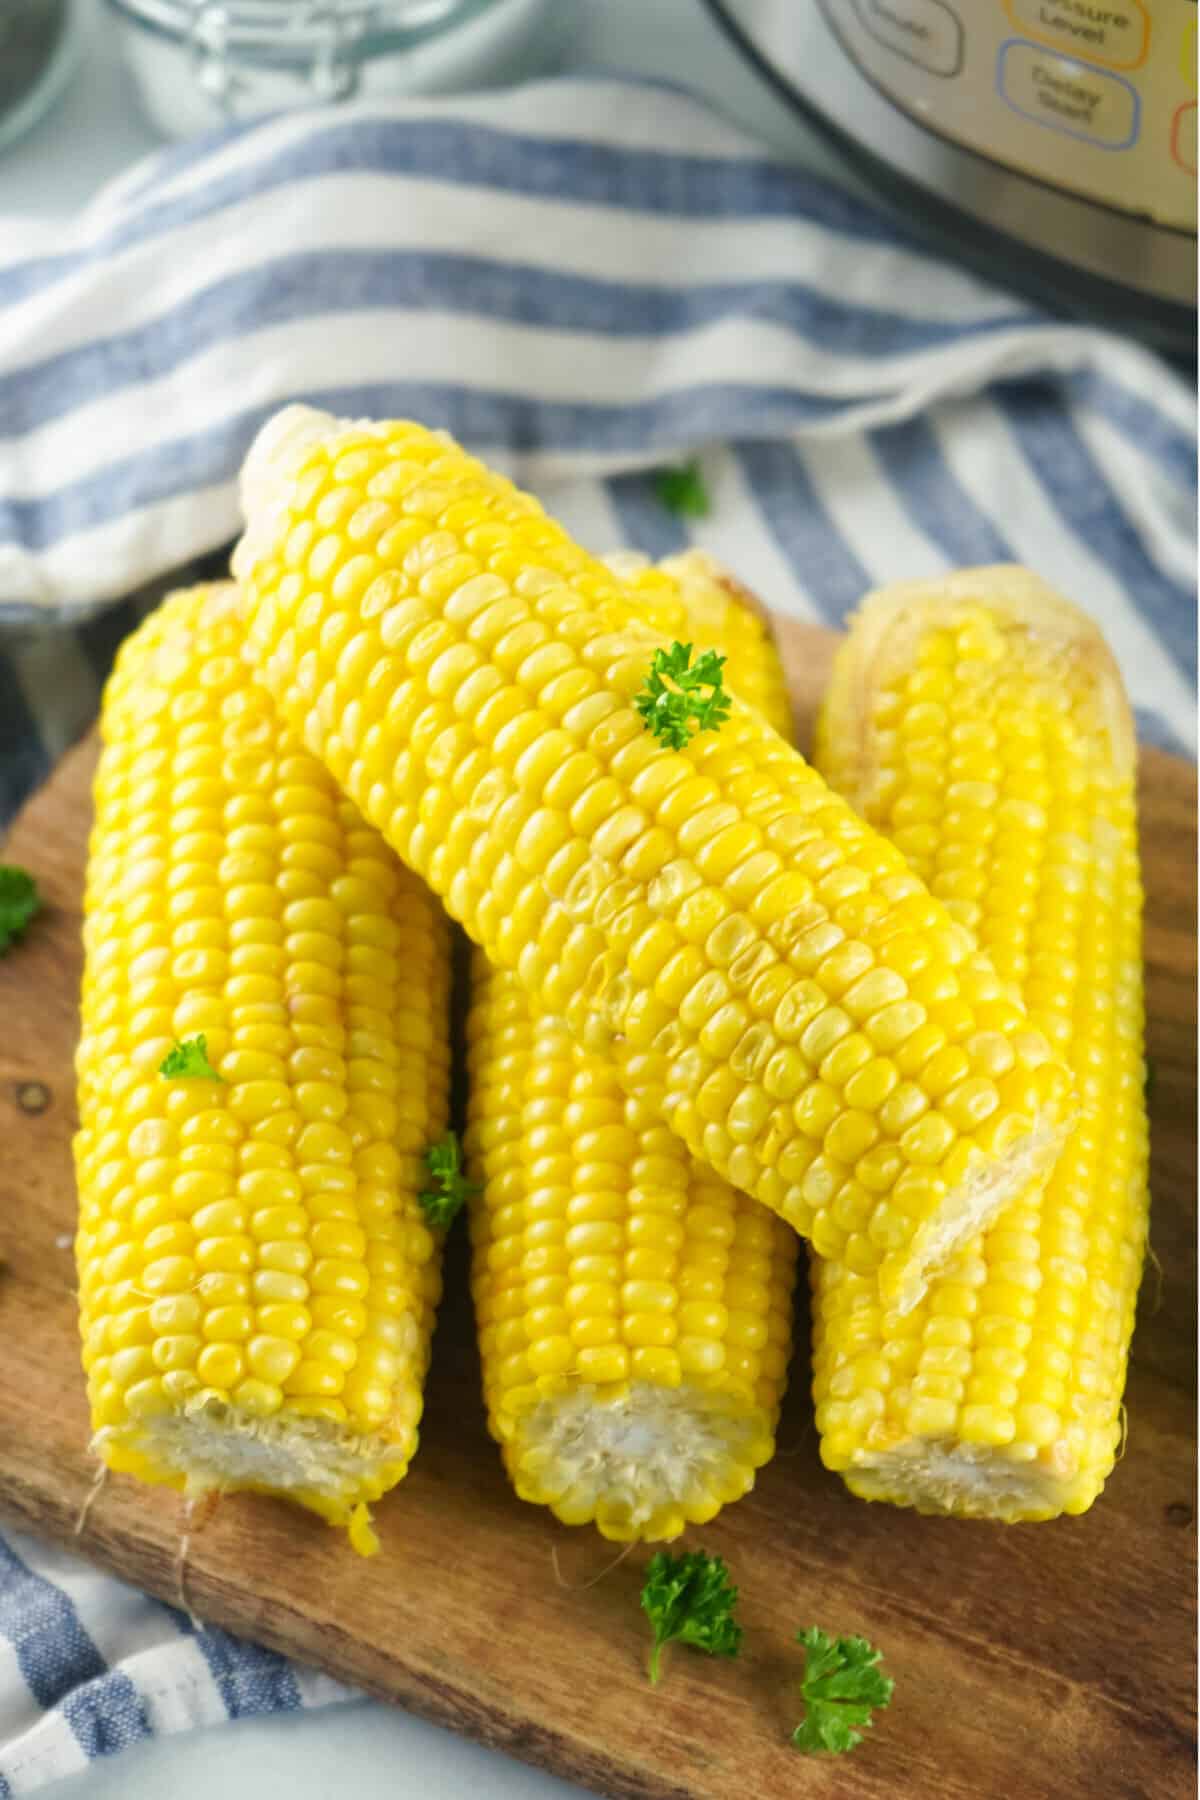 four cooked ears of corn on wood cutting board with parsley flakes.